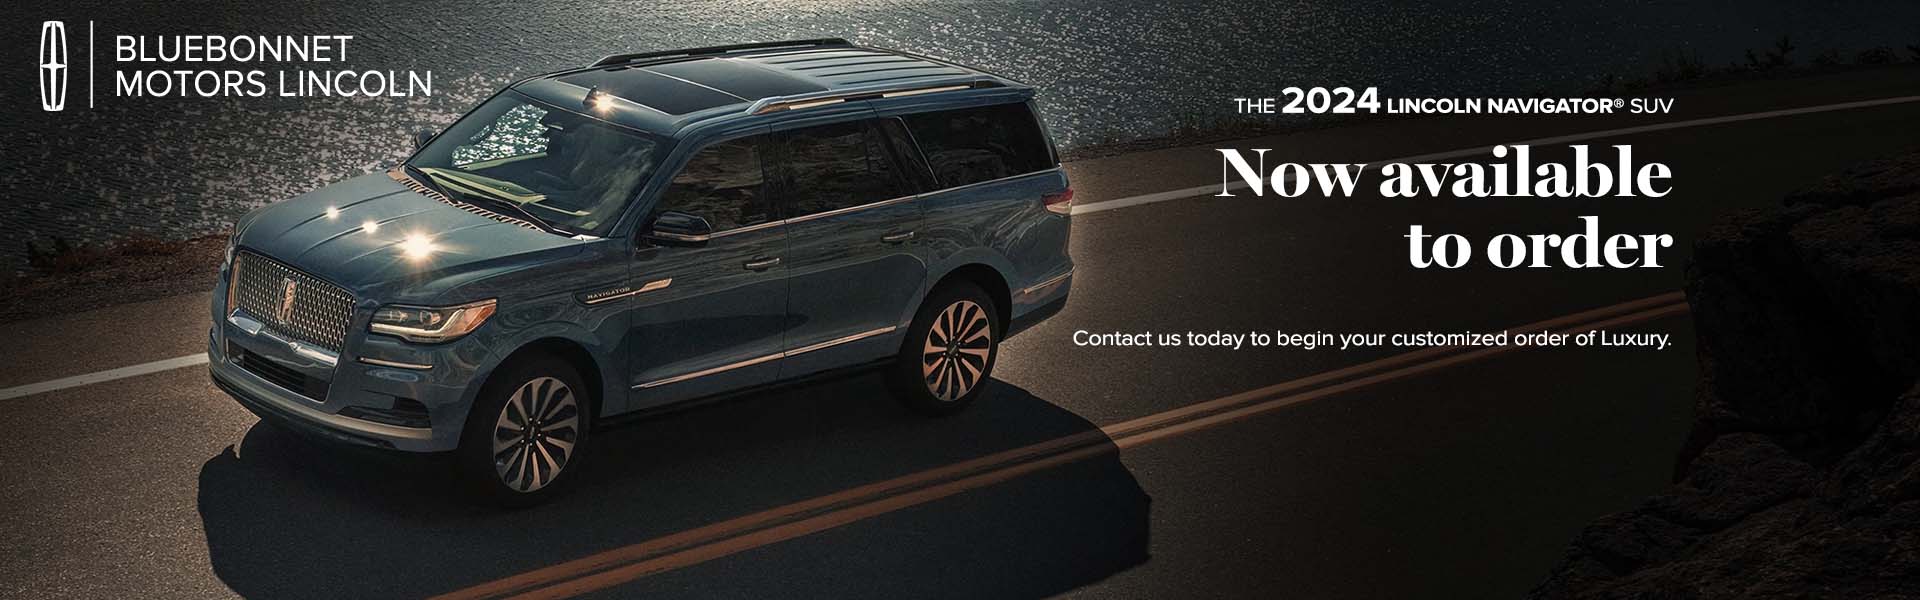 2024 Navigator now available to order